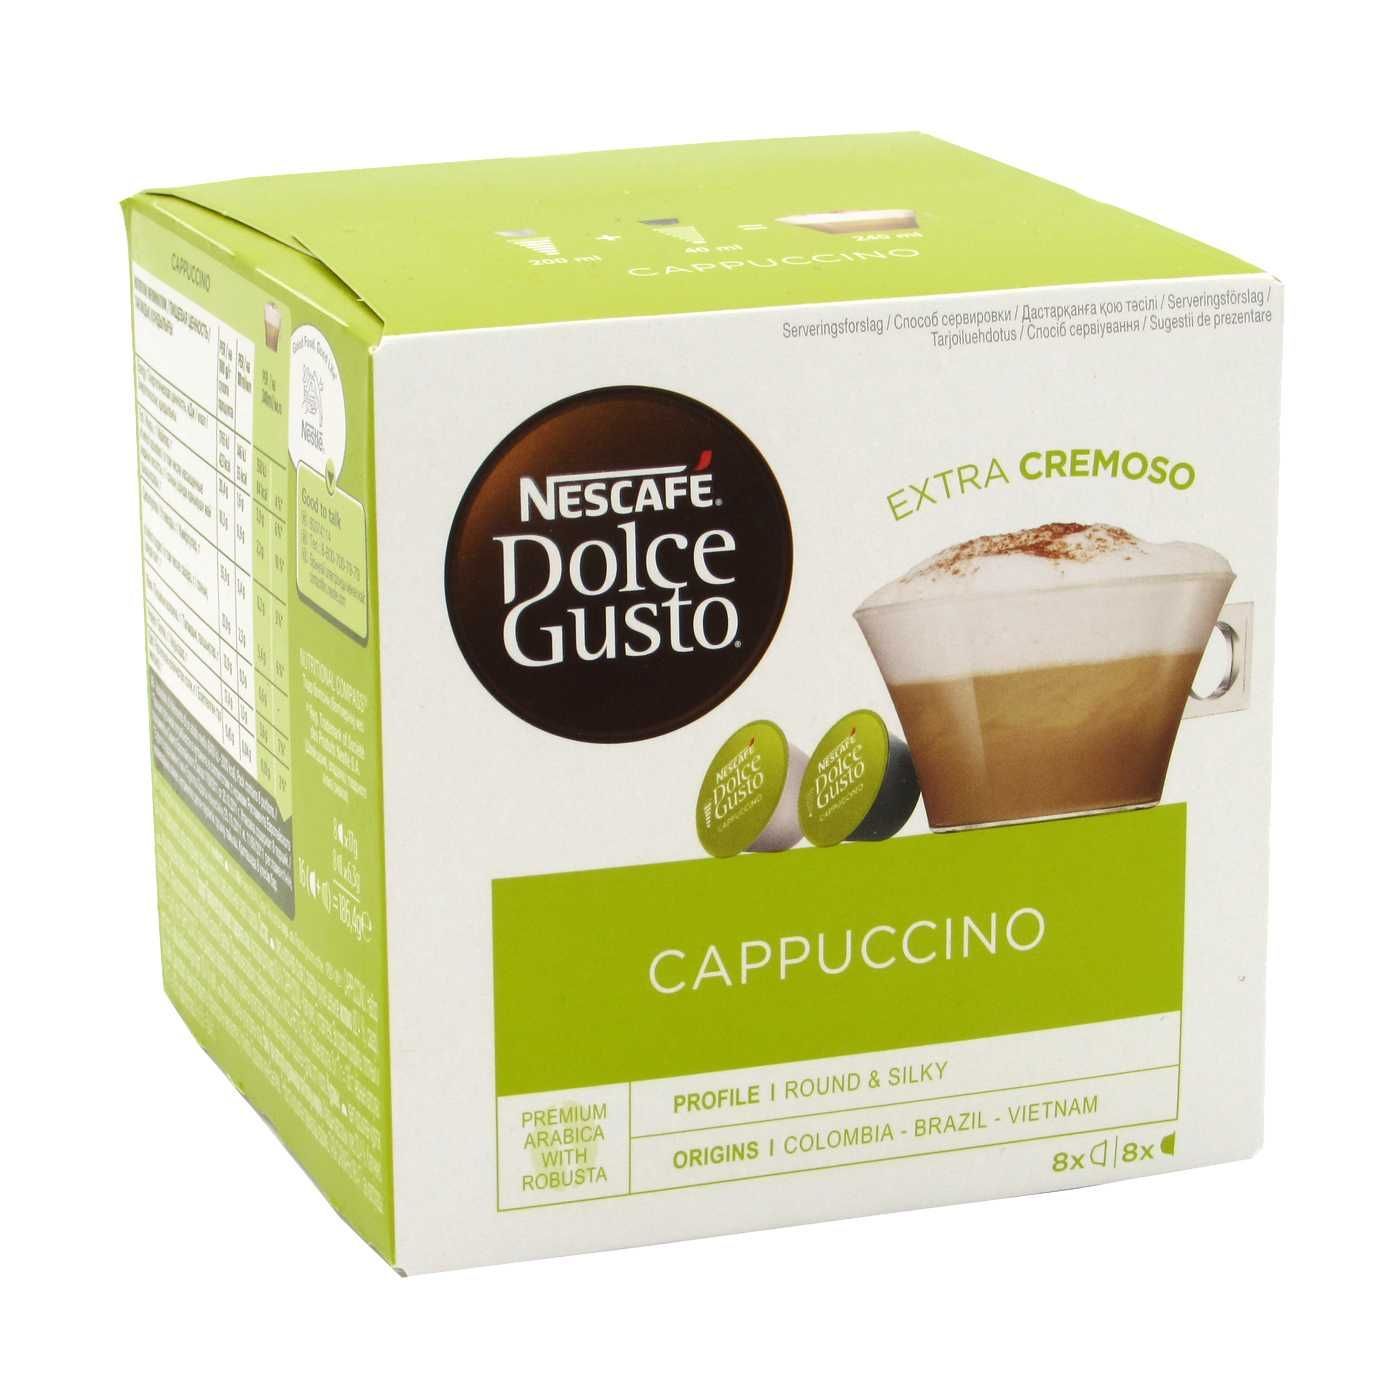 Nescafe dolce cappuccino. Капсулы Dolce gusto Cappuccino. Кофе в капсулах Dolce gusto Cappuccino 16 шт.. Кофе Нескафе Дольче густо капсулы капучино. Капсулы Дольче густо капучино.